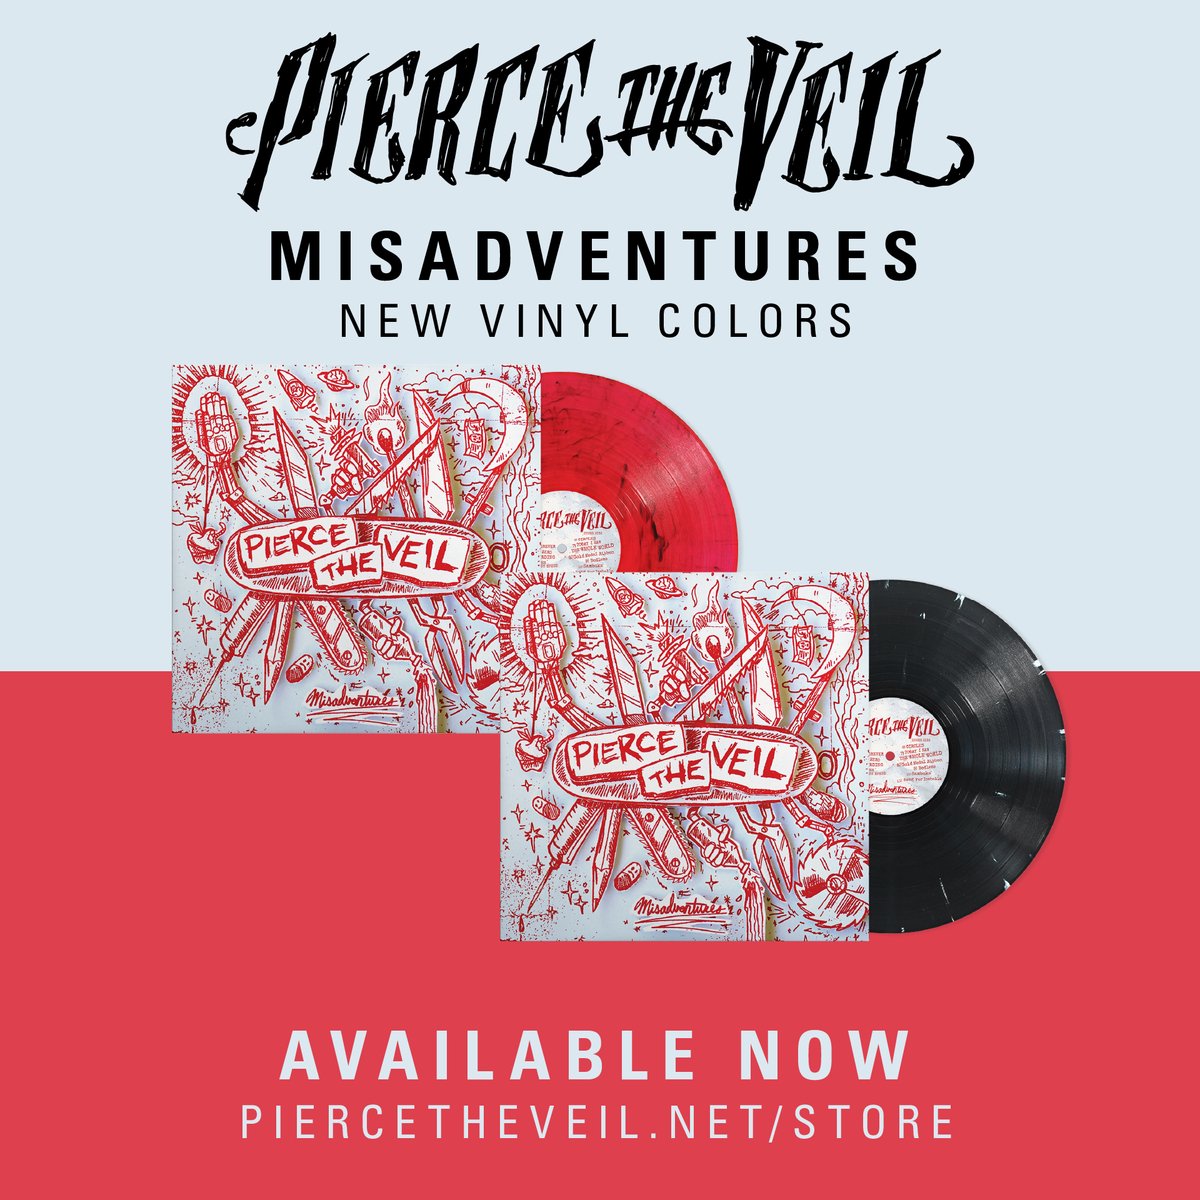 Misadventures vinyl re-press is available now for pre-order. Visit the link below to purchase. found.ee/ptv_store